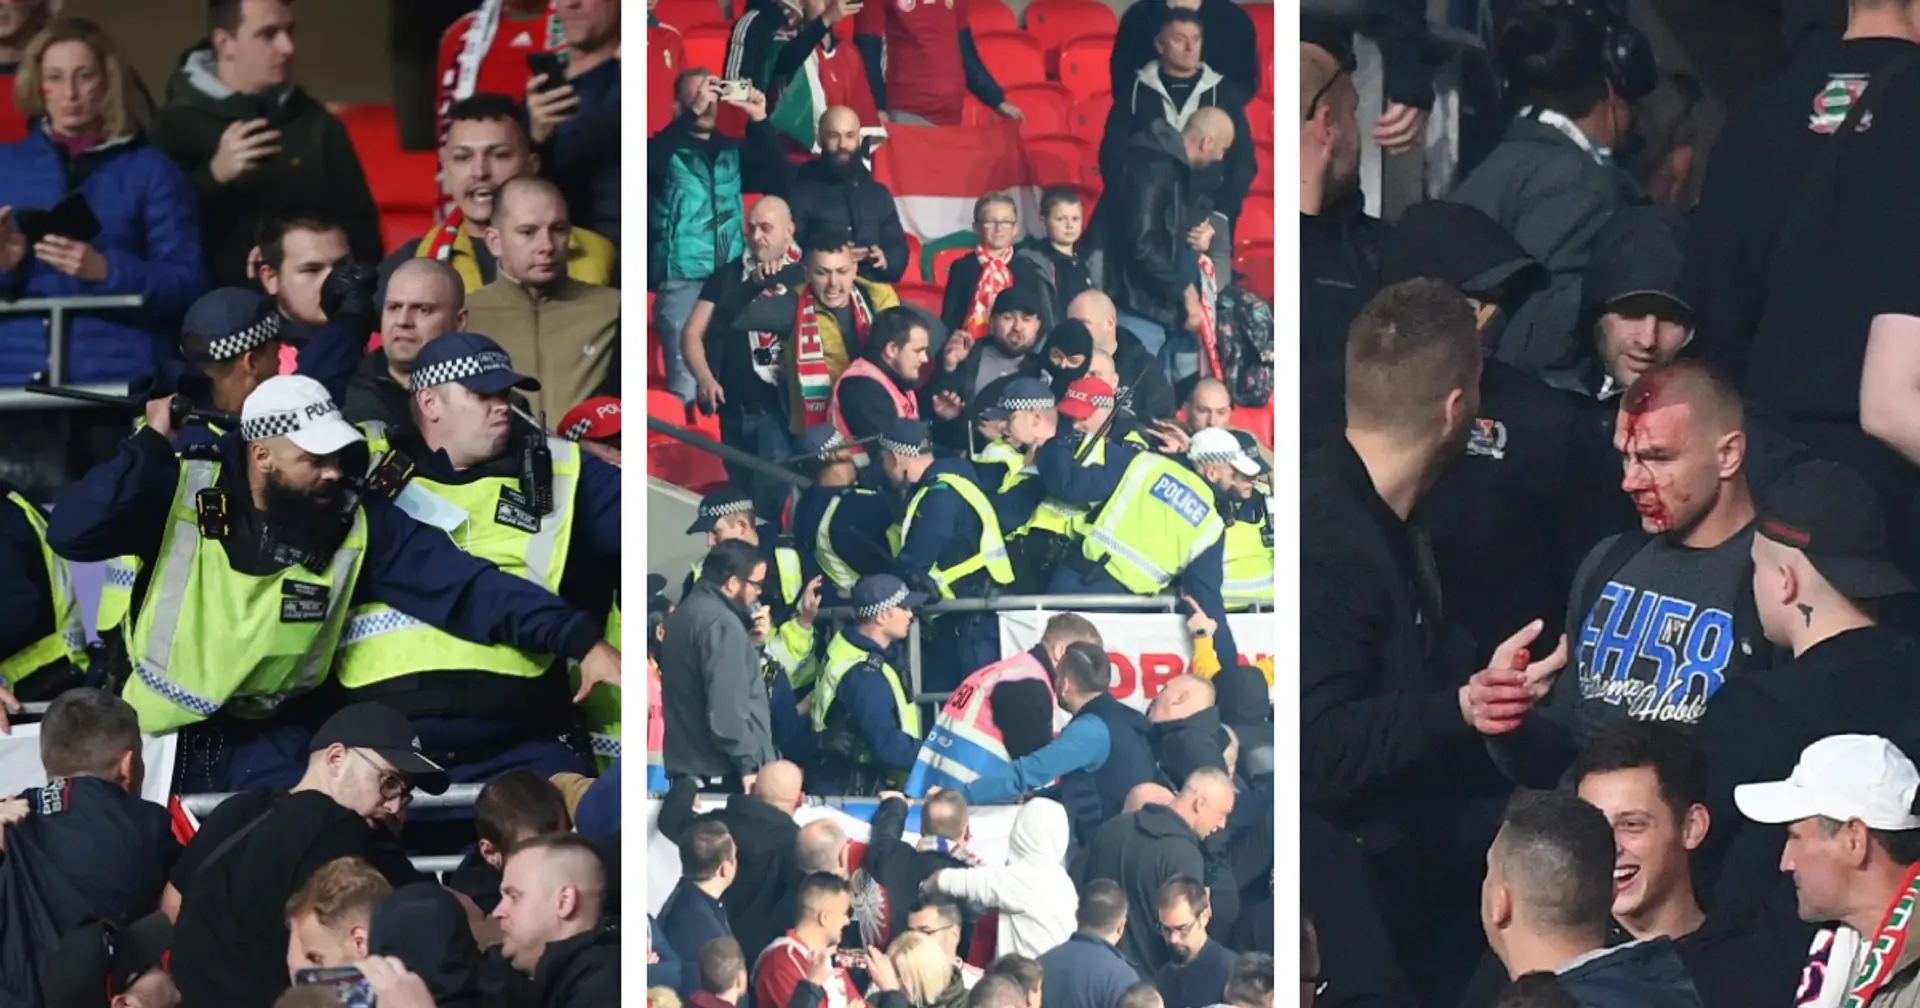 Violence erupts in the stands at Wembley during England vs Hungary clash